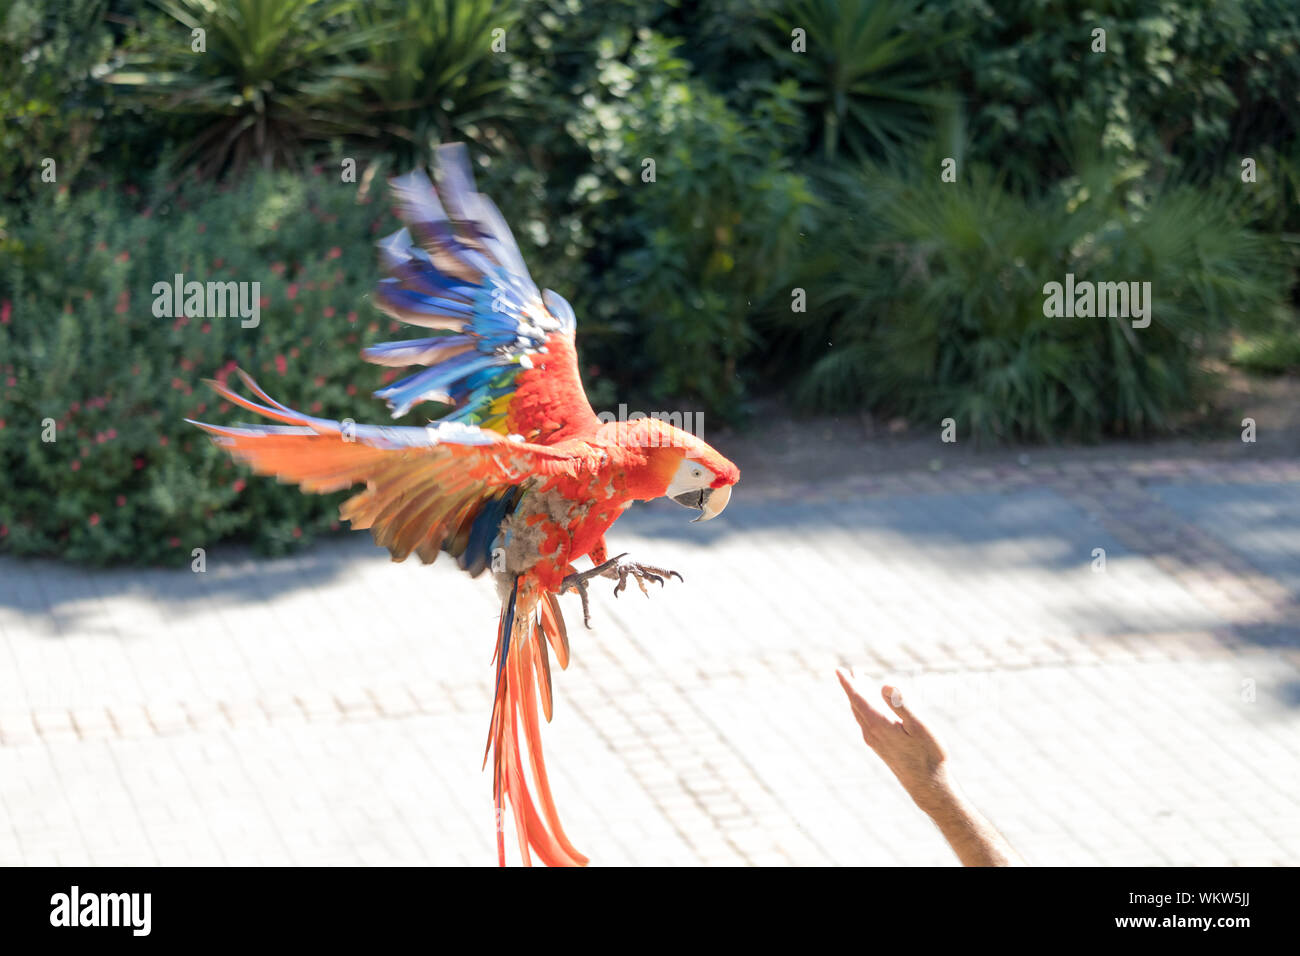 High Angle View Of Scarlet Macaw Flying Over Footpath Stock Photo